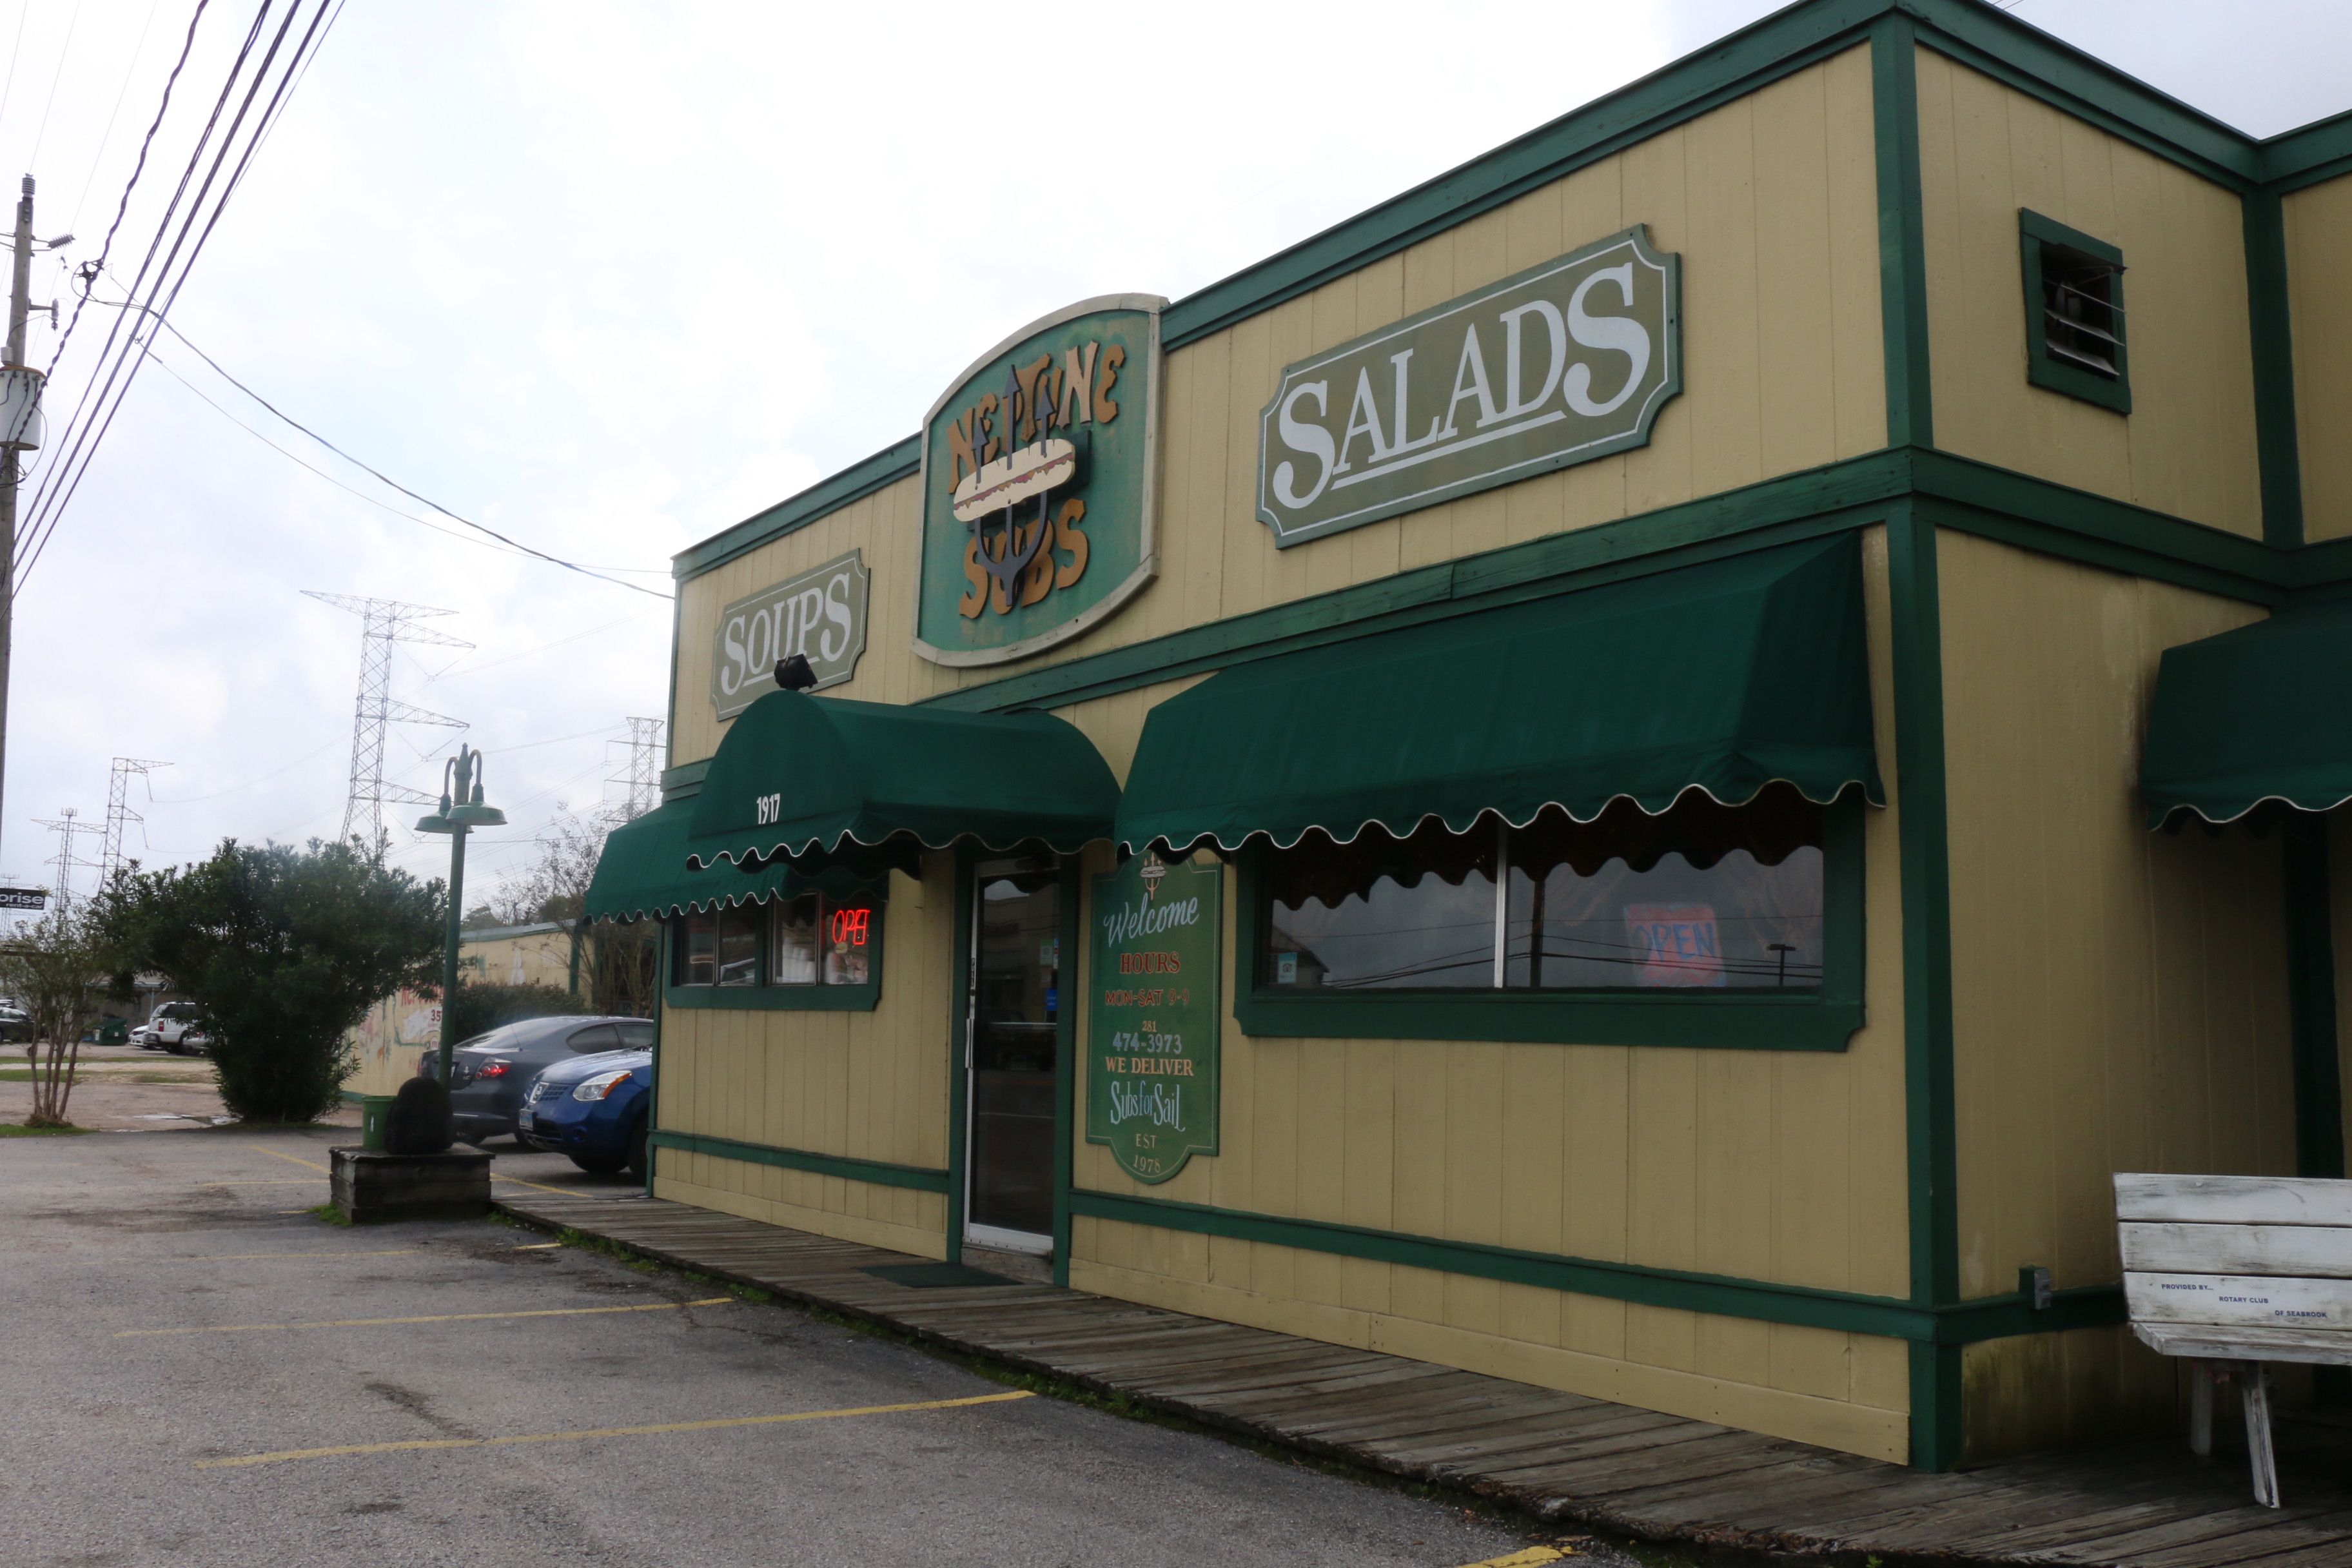 PHOTO: Neptune's Subs is one of the Seabrook establishments that will be relocating after construction begins. Photo courtesy of Yasmeen Gomez.